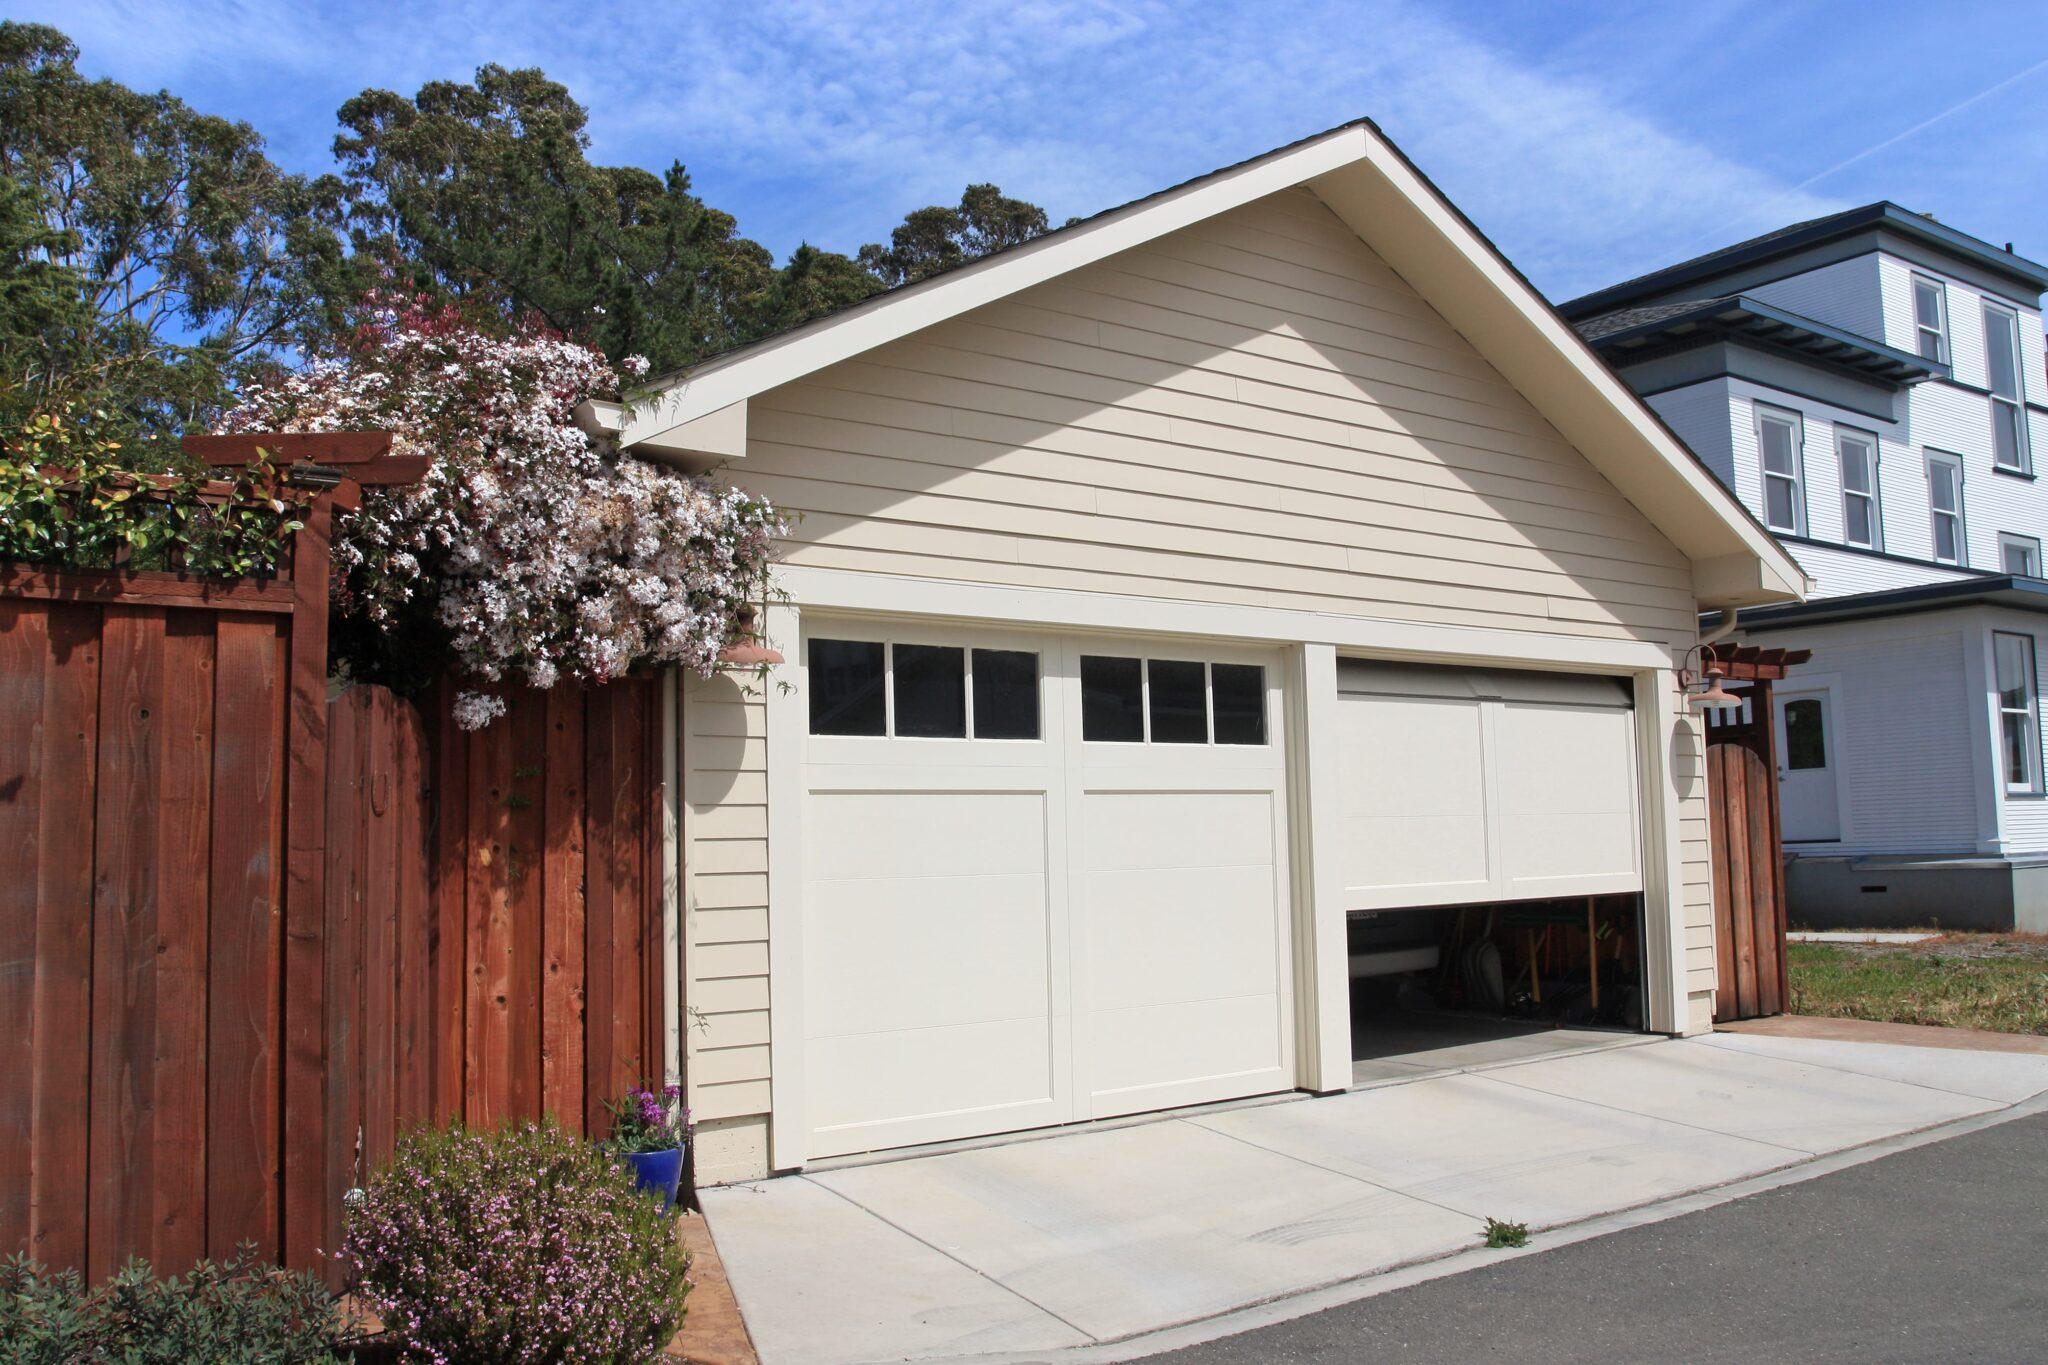 What to Do When Your Garage Door Closes And Immediately Opens Unexpectedly? Troubleshooting Guide